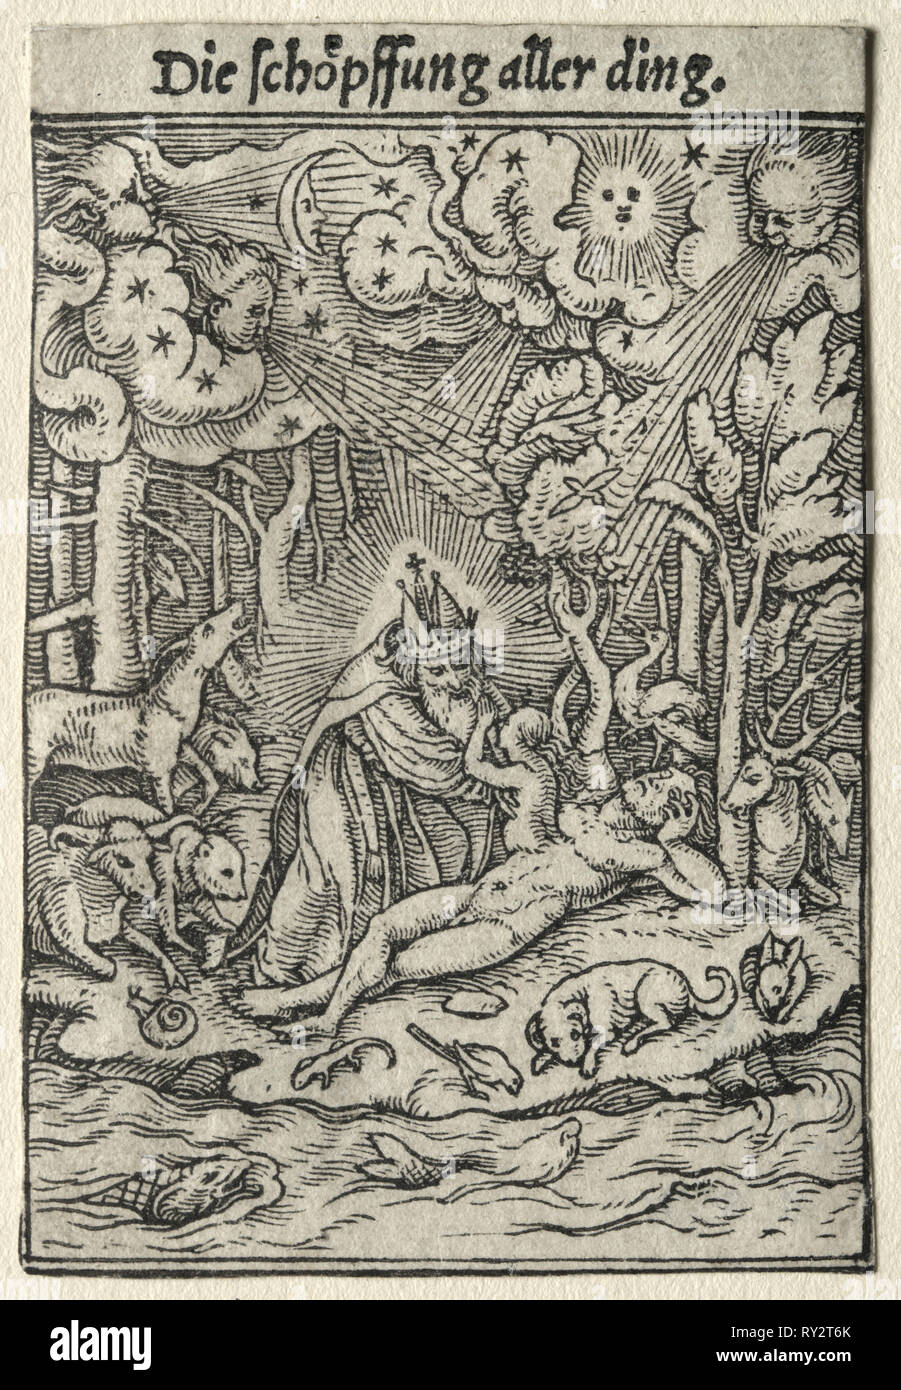 Dance of Death:  The Creation. Hans Holbein (German, 1497/98-1543). Woodcut Stock Photo